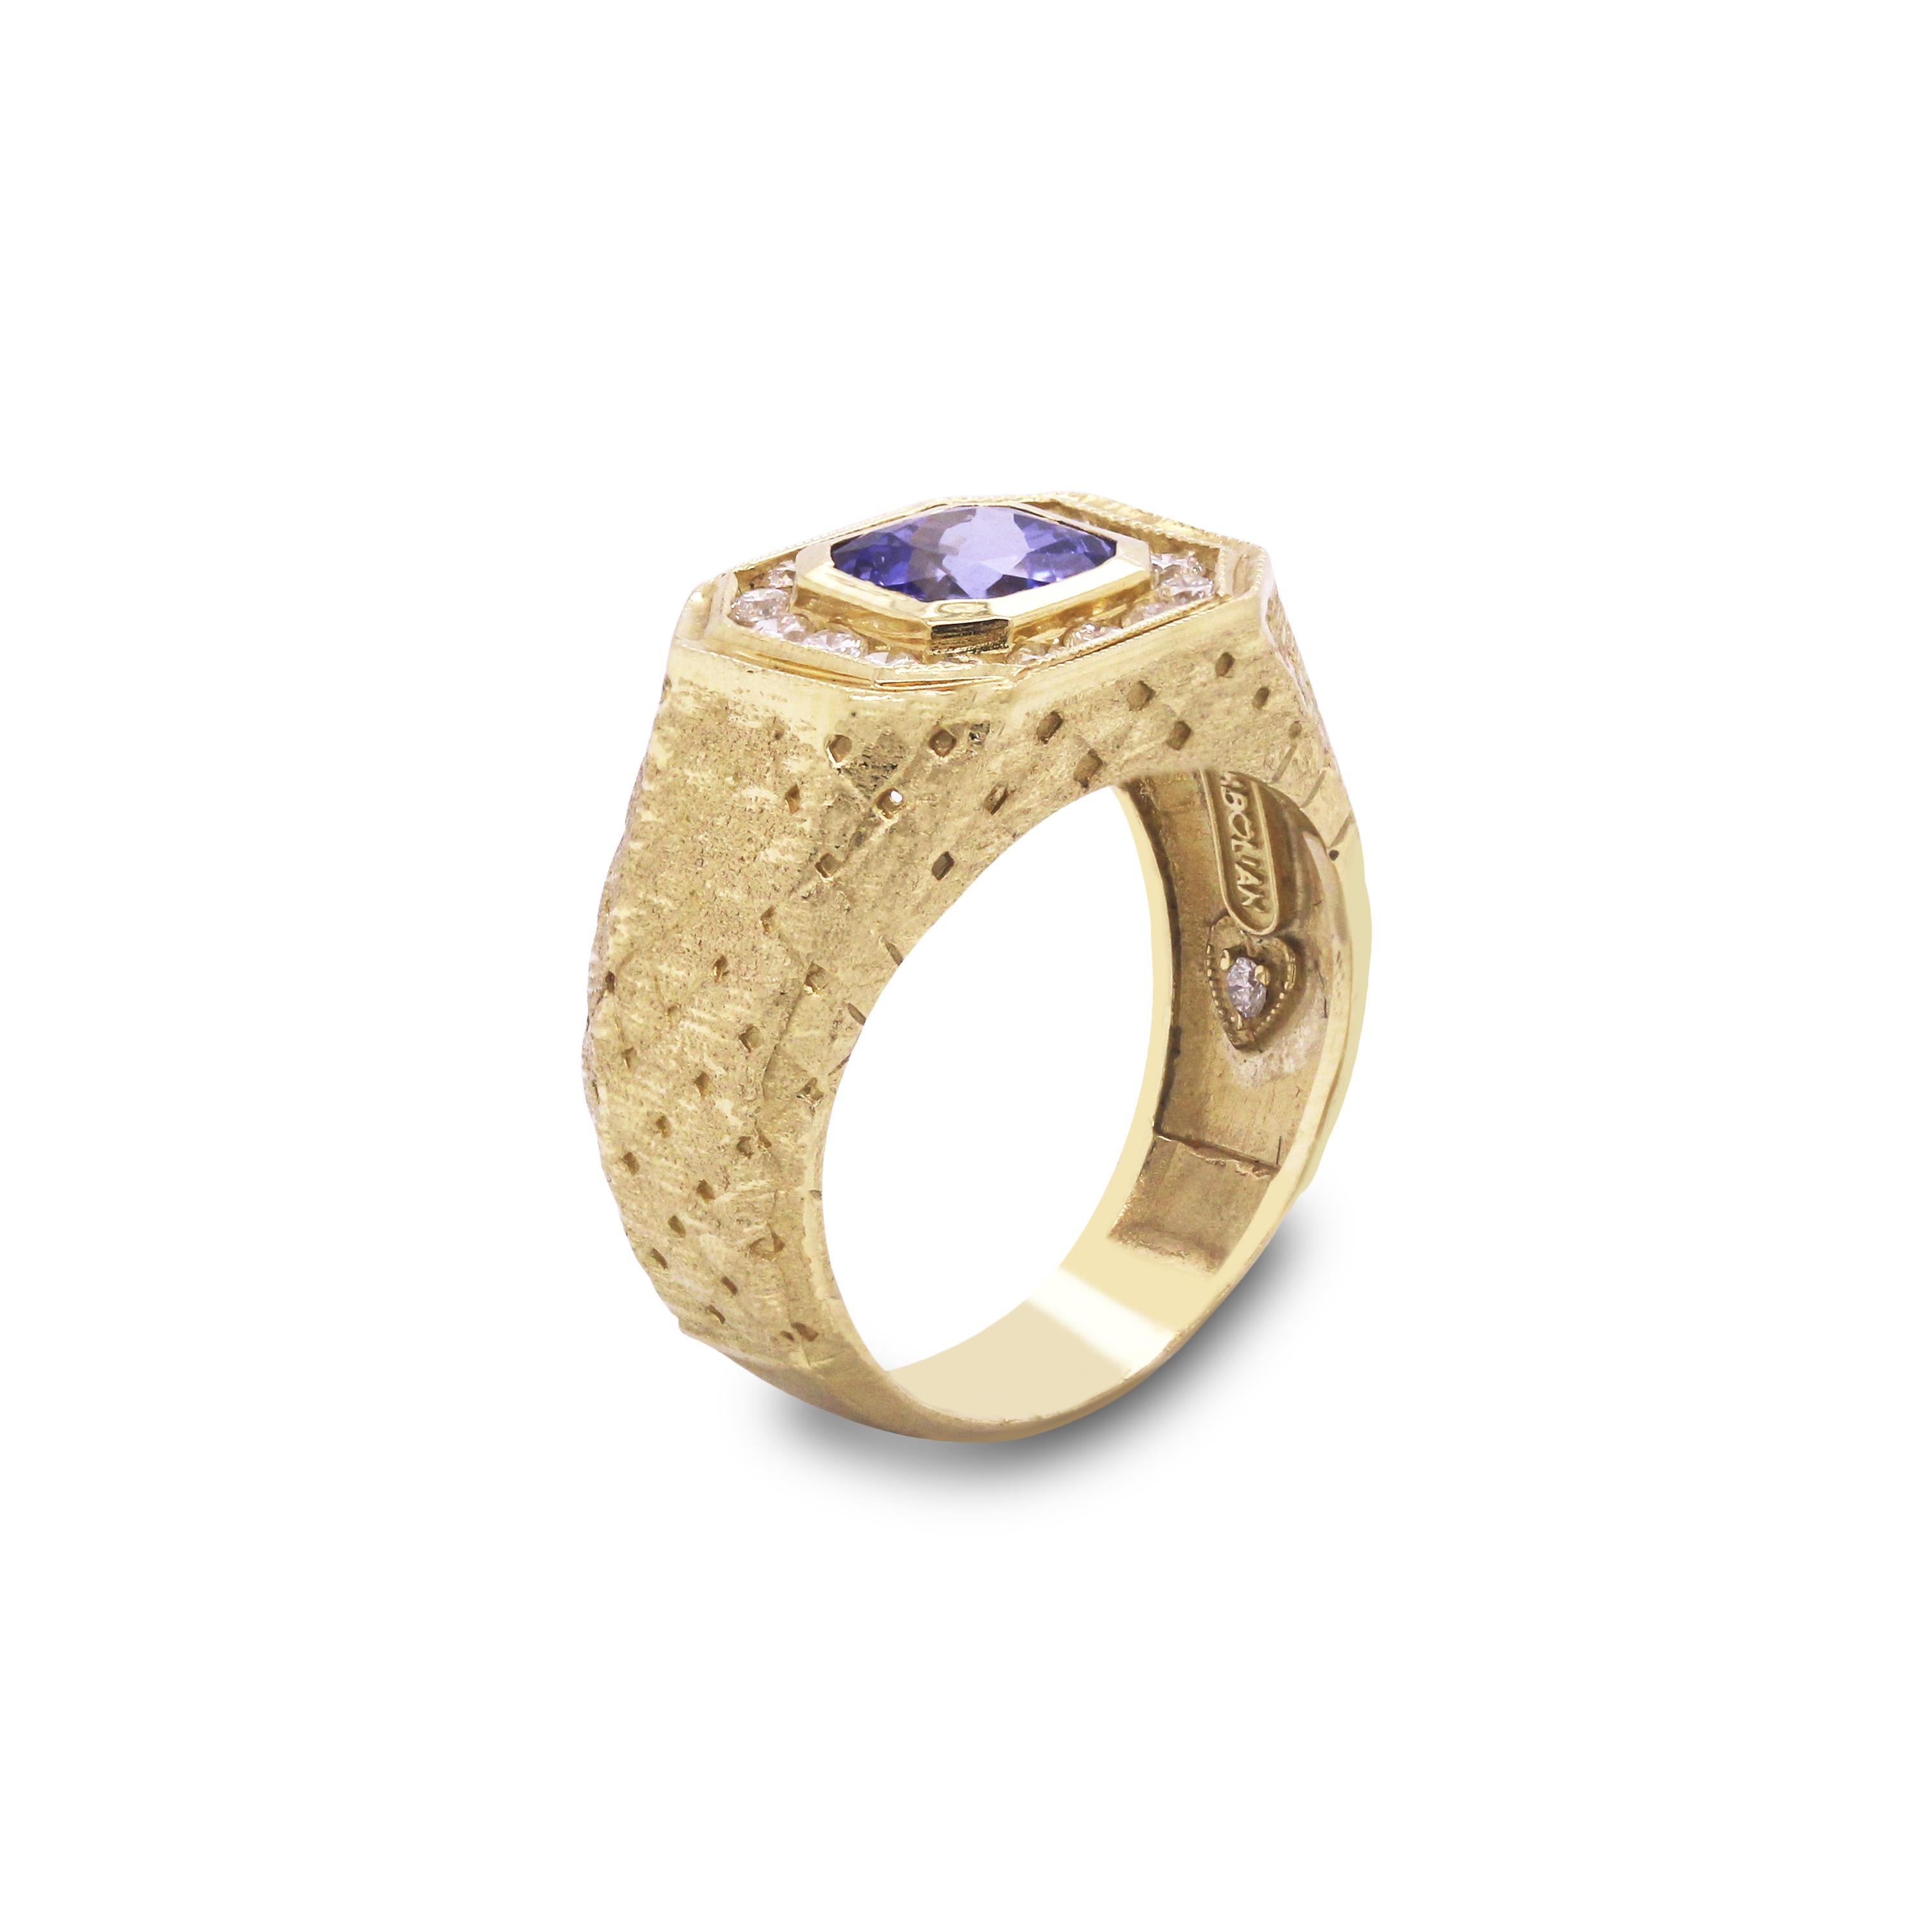 18K Yellow Gold Mens Ring with Diamonds and Tanzanite by Stambolian

This mens ring from Stambolian features textured, brushed gold finish on both sides and the center is Tanzanite surrounded by diamonds

0.56 carat G color, VS clarity